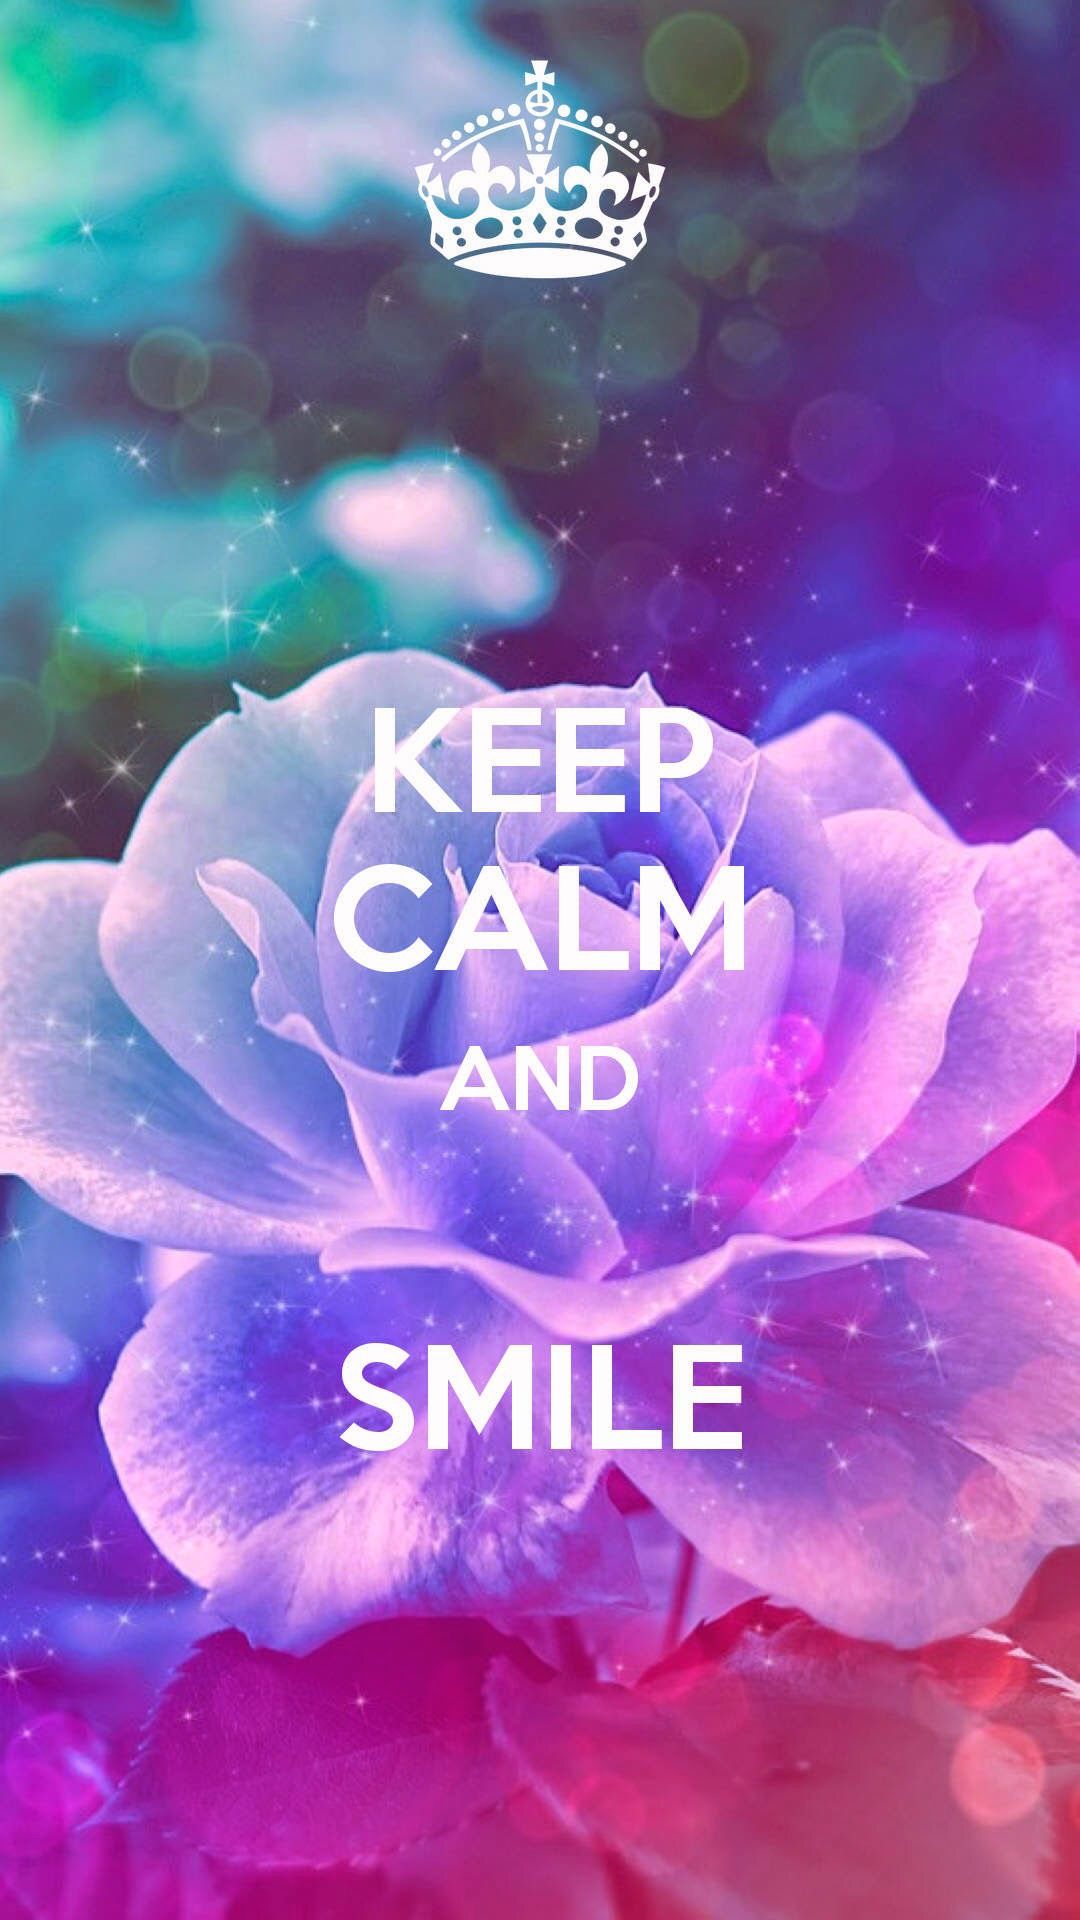 Keep Calm Background HD Hupages Download iPhone Wallpaper. Keep calm wallpaper, Keep calm quotes, Keep calm and smile